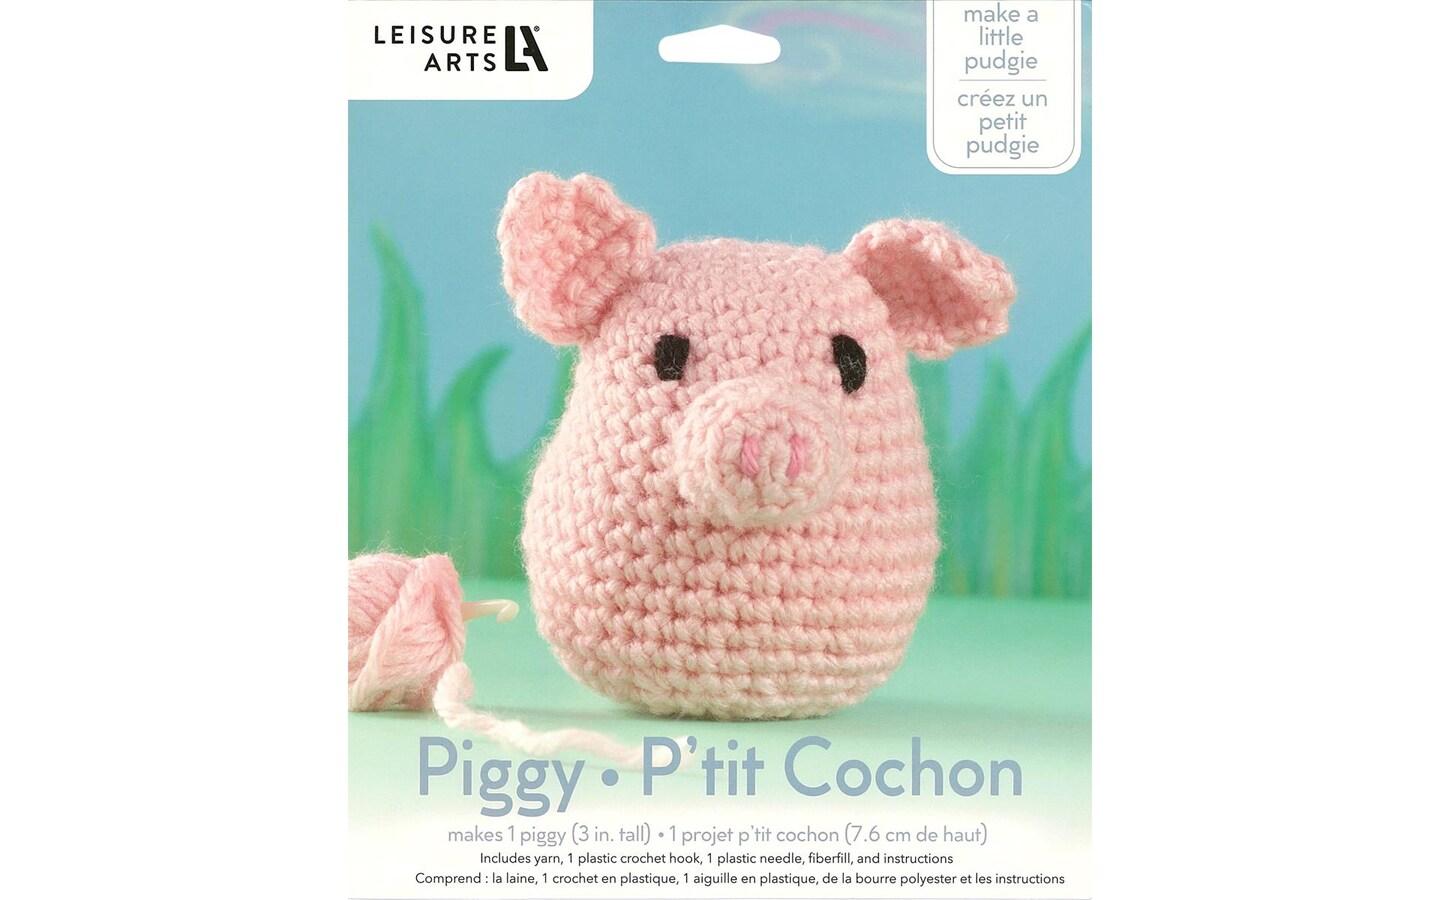  THE MOOMOYUS Crochet kit for Beginners, Crafts for Adults,  Beginner Craft kit, Amigurumi, Crochet Animal Kits, Smooth Yarn for  Beginners, Step-by-Step tutorials, Crochet Accesories, Pig Crochet kit.